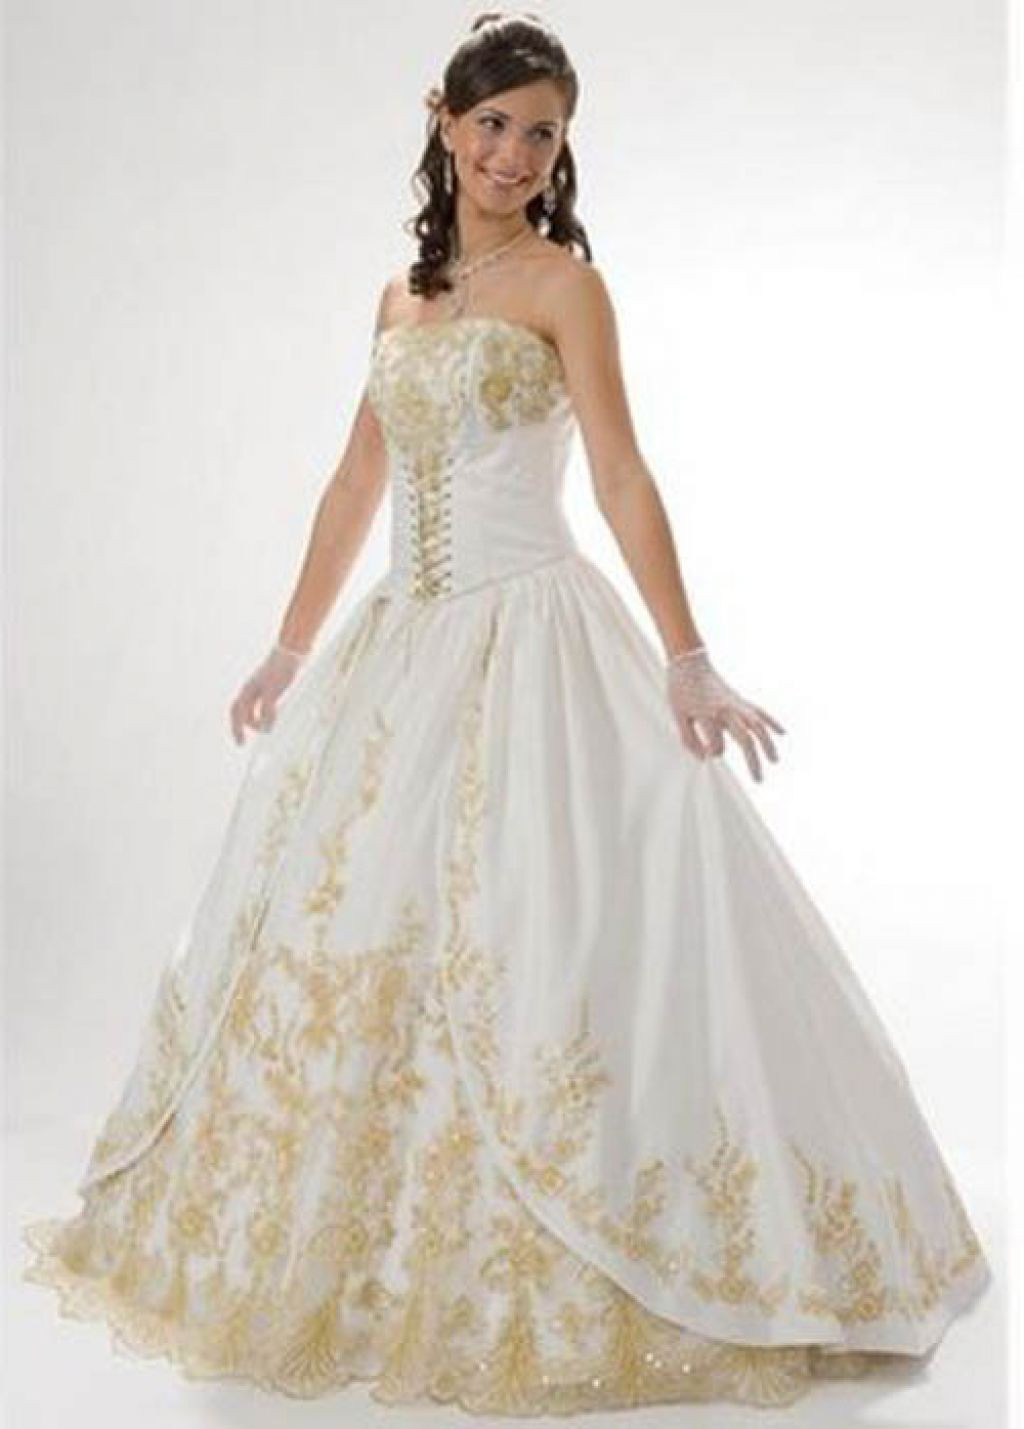 White And Gold Wedding Dresses
 White And Gold Wedding Dress Wedding and Bridal Inspiration